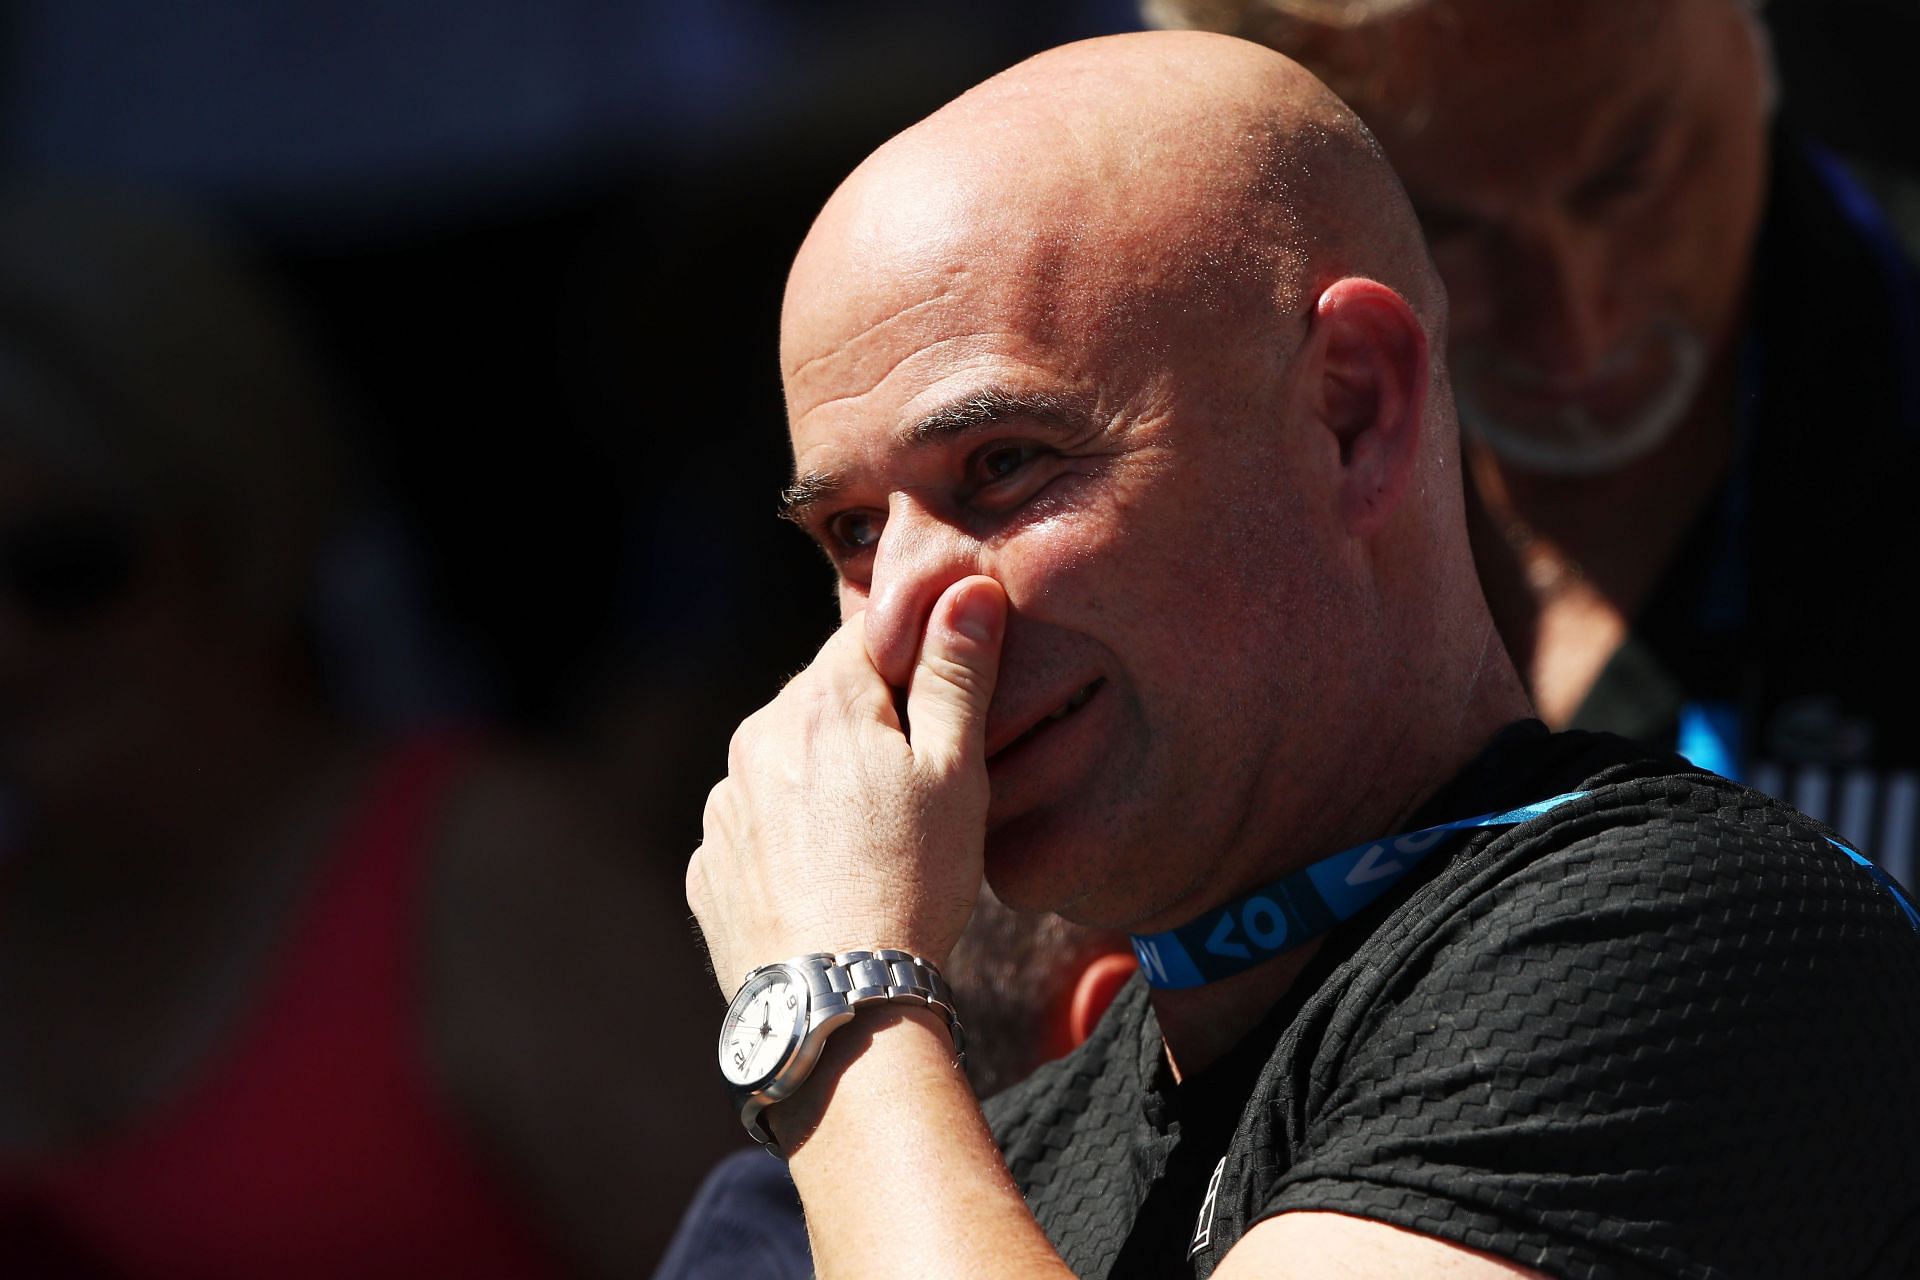 Andre Agassi at the 2018 Australian Open